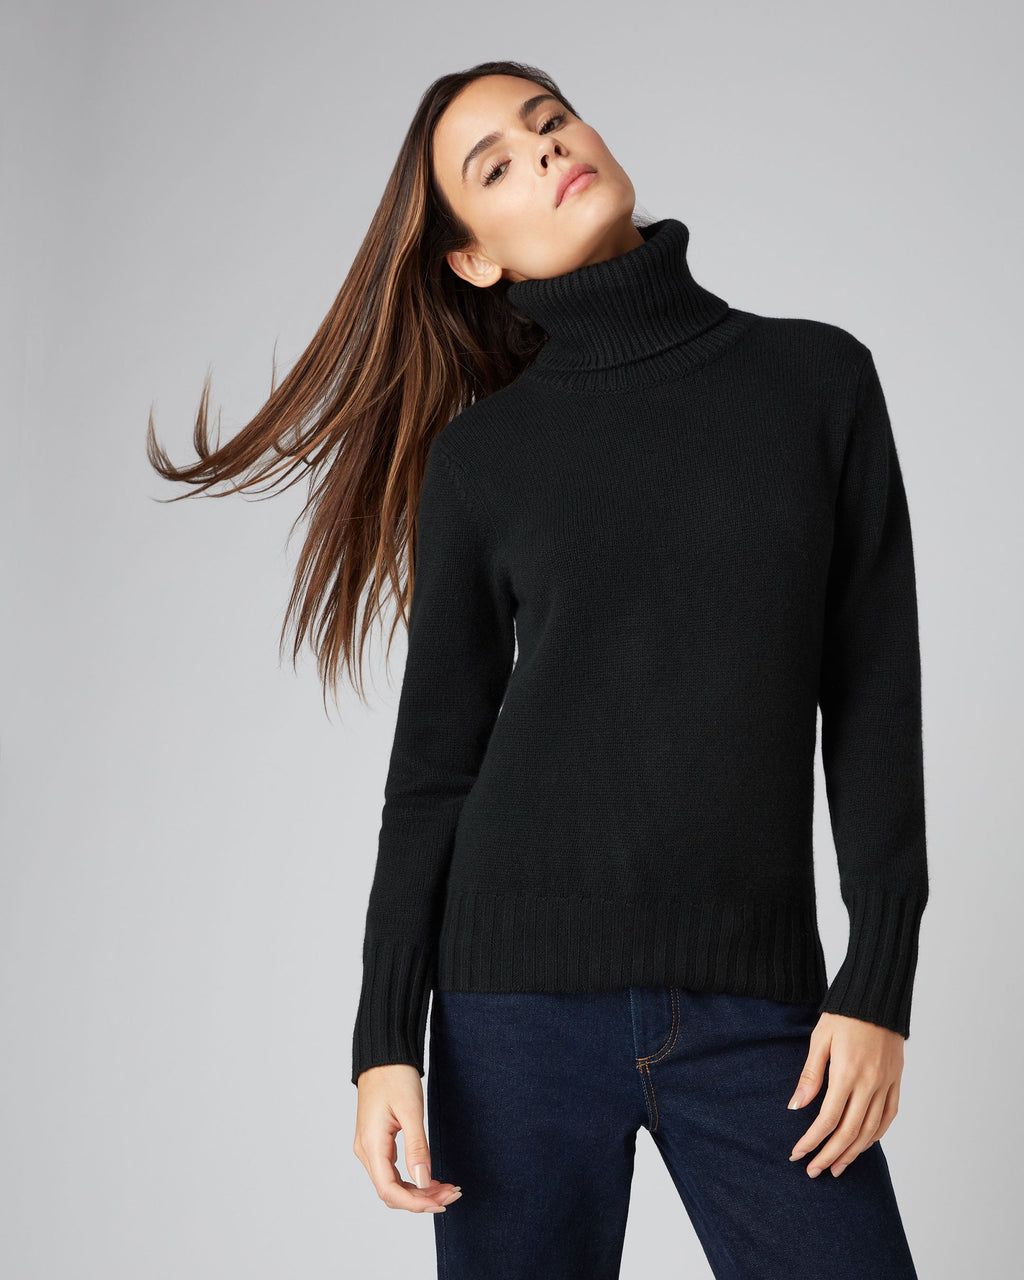 PIKADINGNIS Cashmere Sweater Women Turtleneck Ribbed Stretch Thick Knitted  Slim Jumper Winter Cashmere Sweater For Women Warm Sweaters 